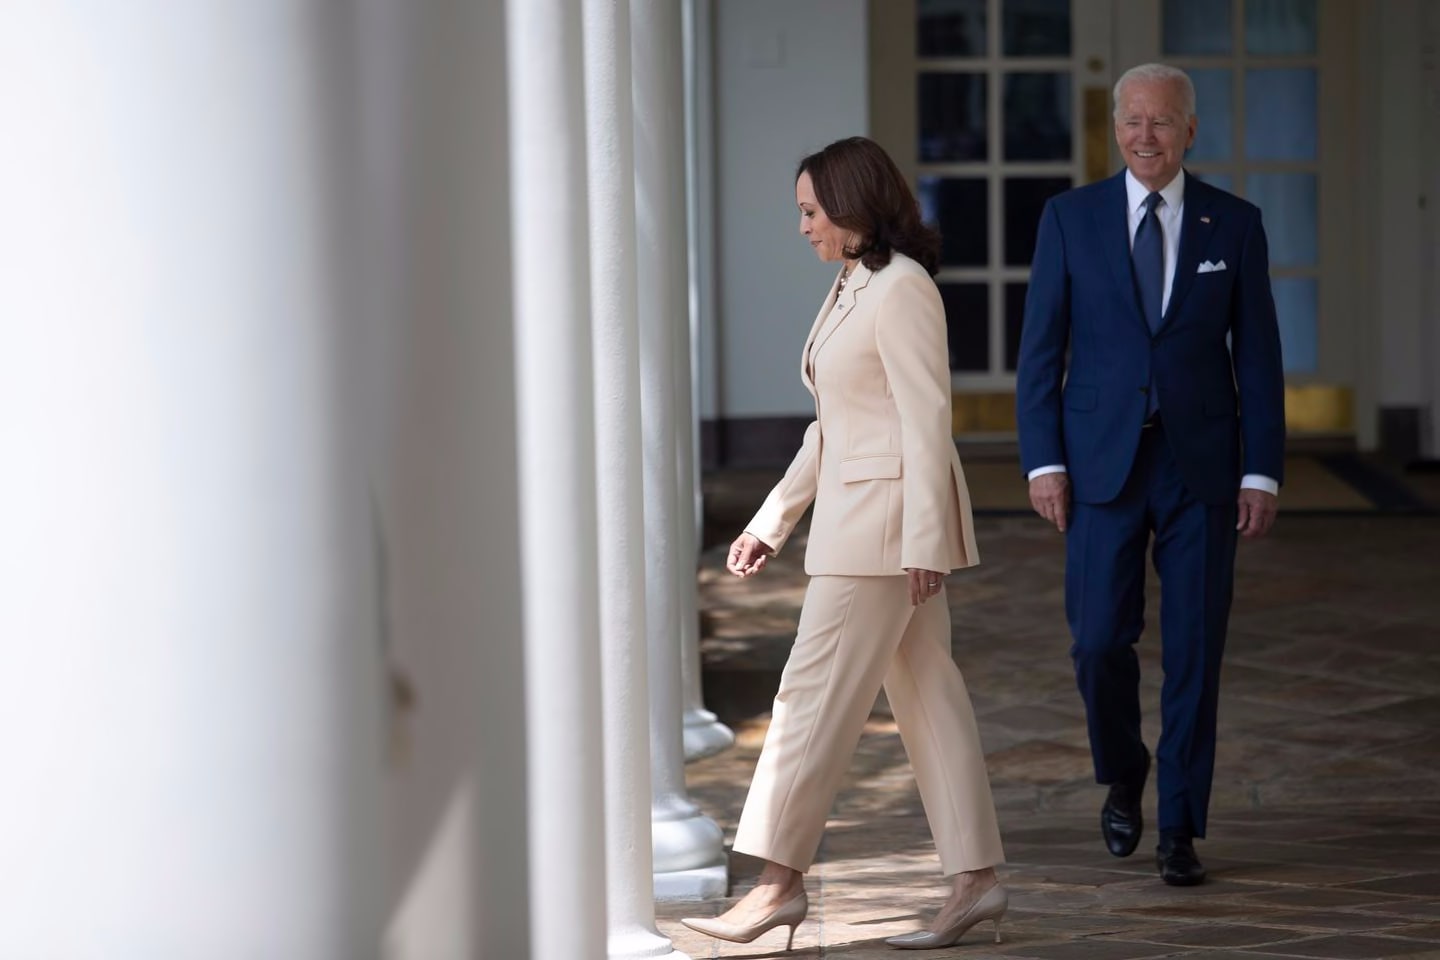 President Biden exited the Oval Office with Vice President Kamala Harris at the White House in Washington on July 26.